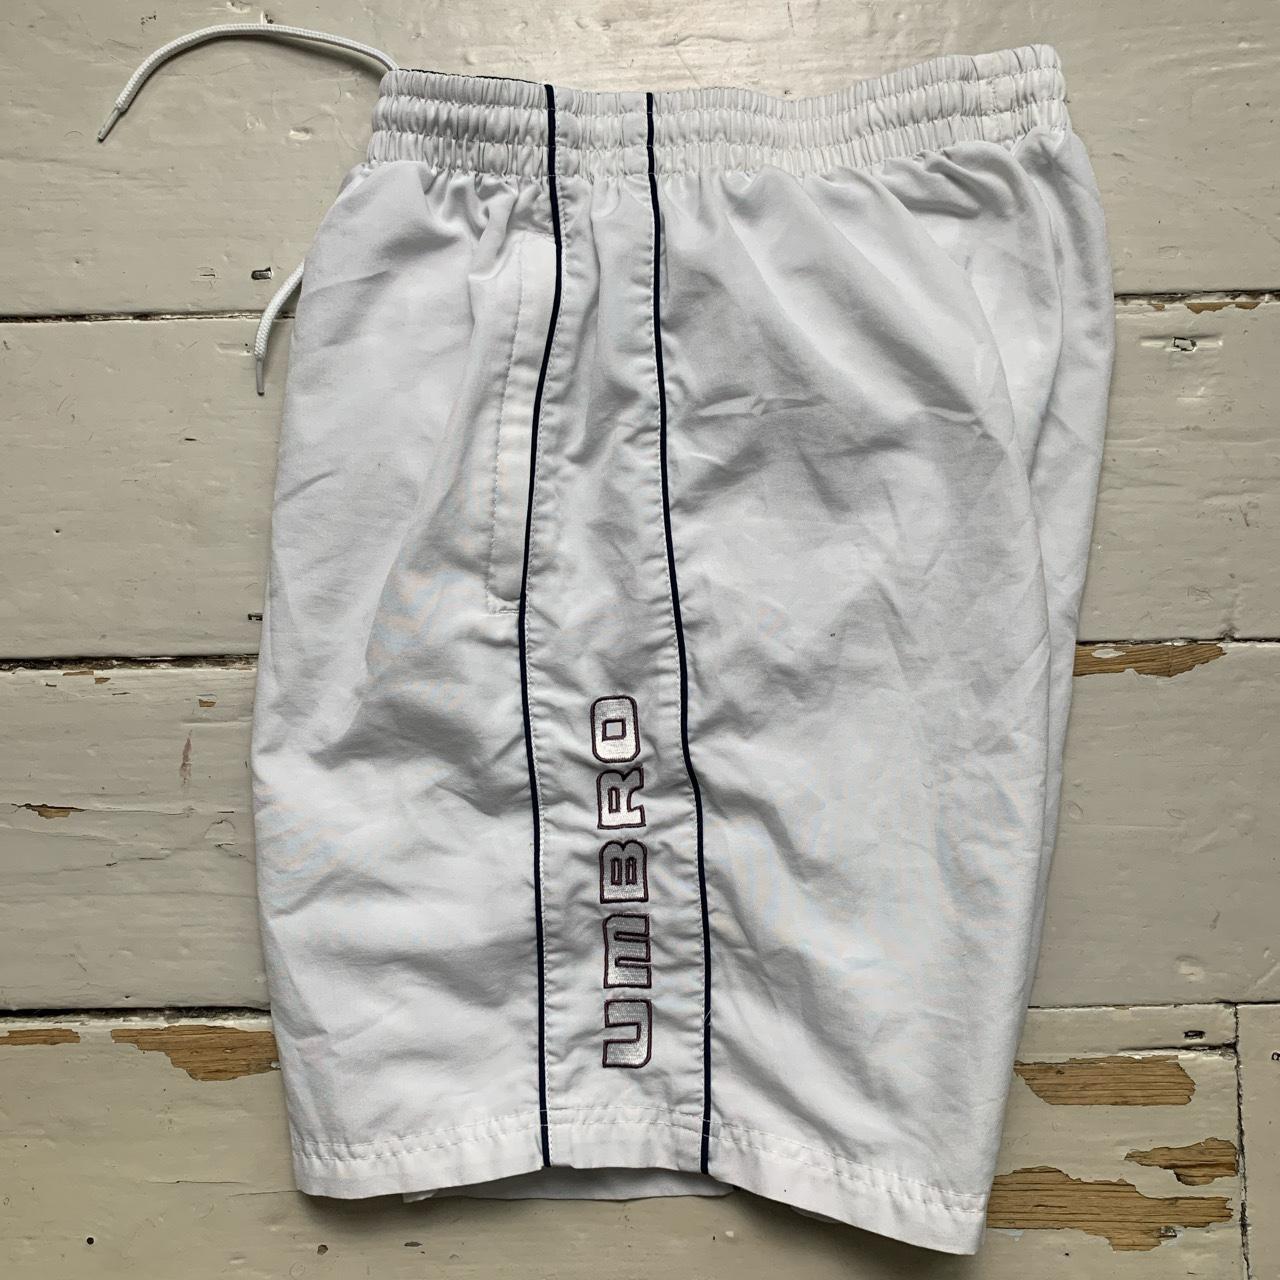 Umbro White Navy and Brown Vintage Shell Track Pant Shorts